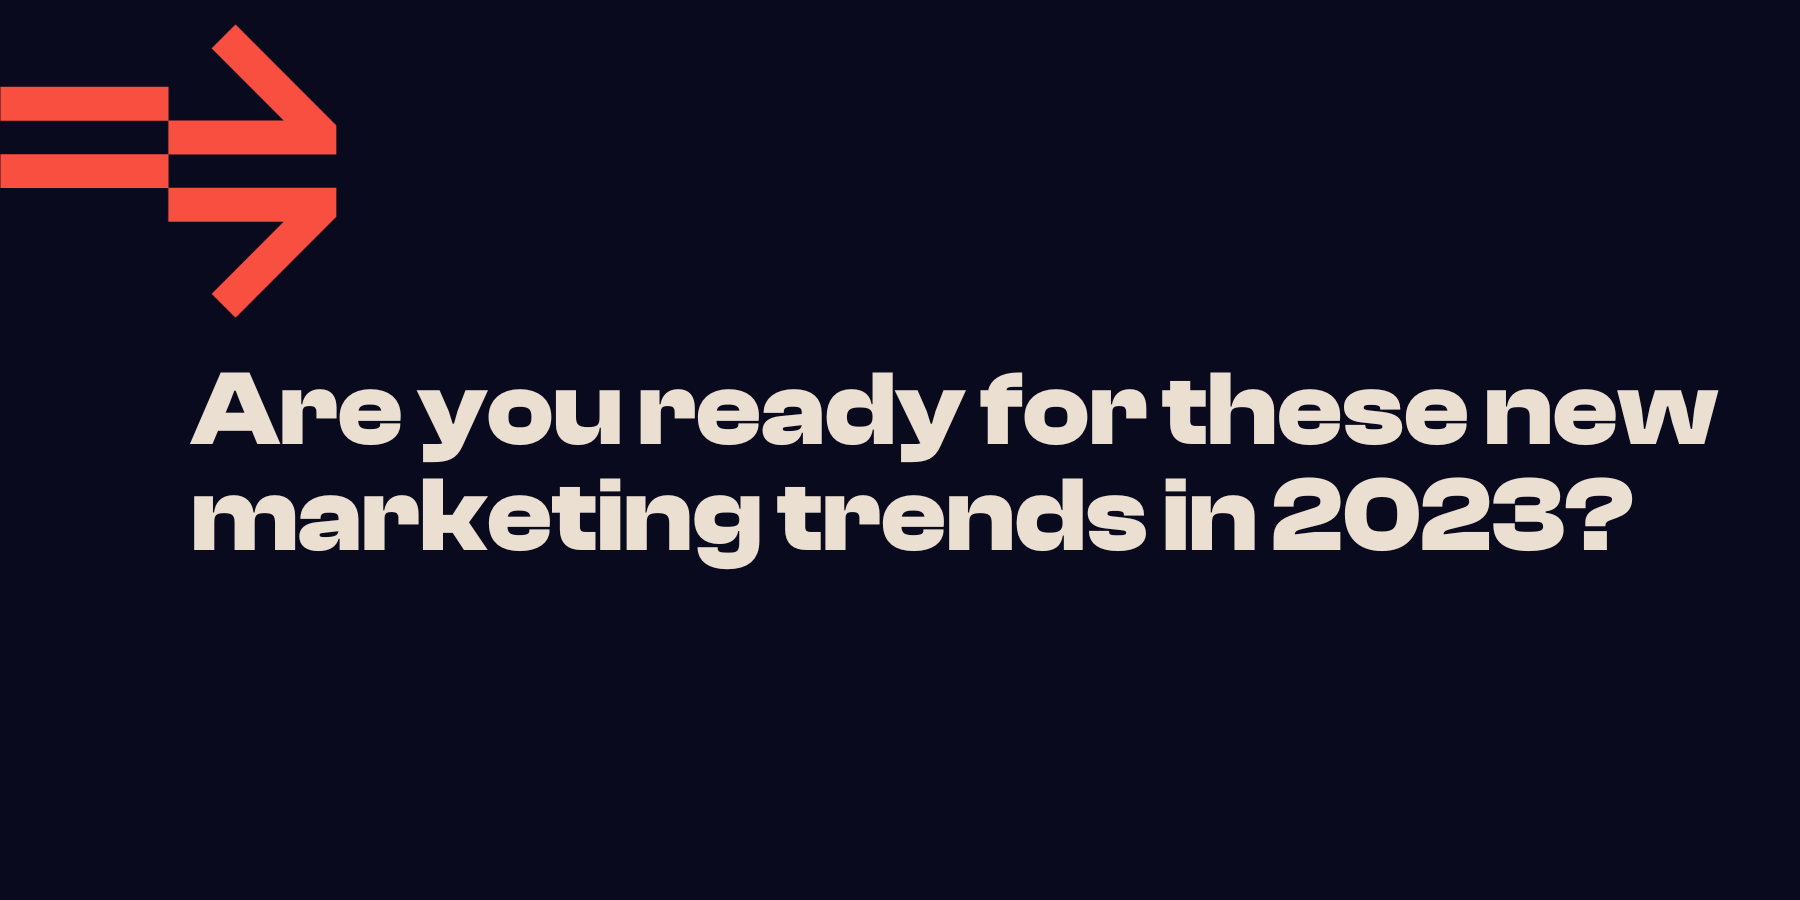 New marketing trends in 2023 